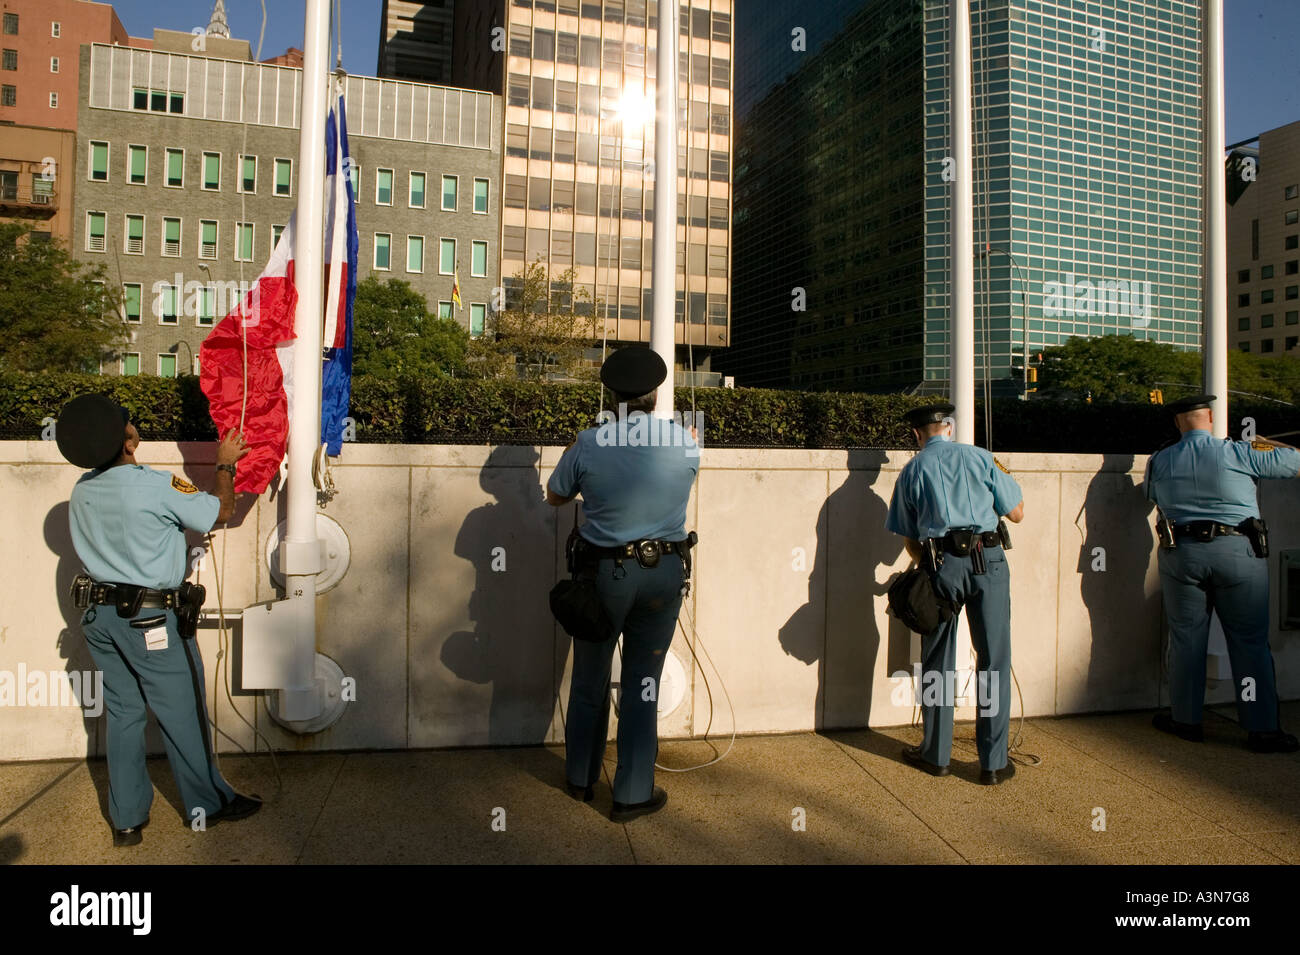 United Nations security guards raise the member states flags in front of the UN general secretariat building on 1st avenue in Ne Stock Photo